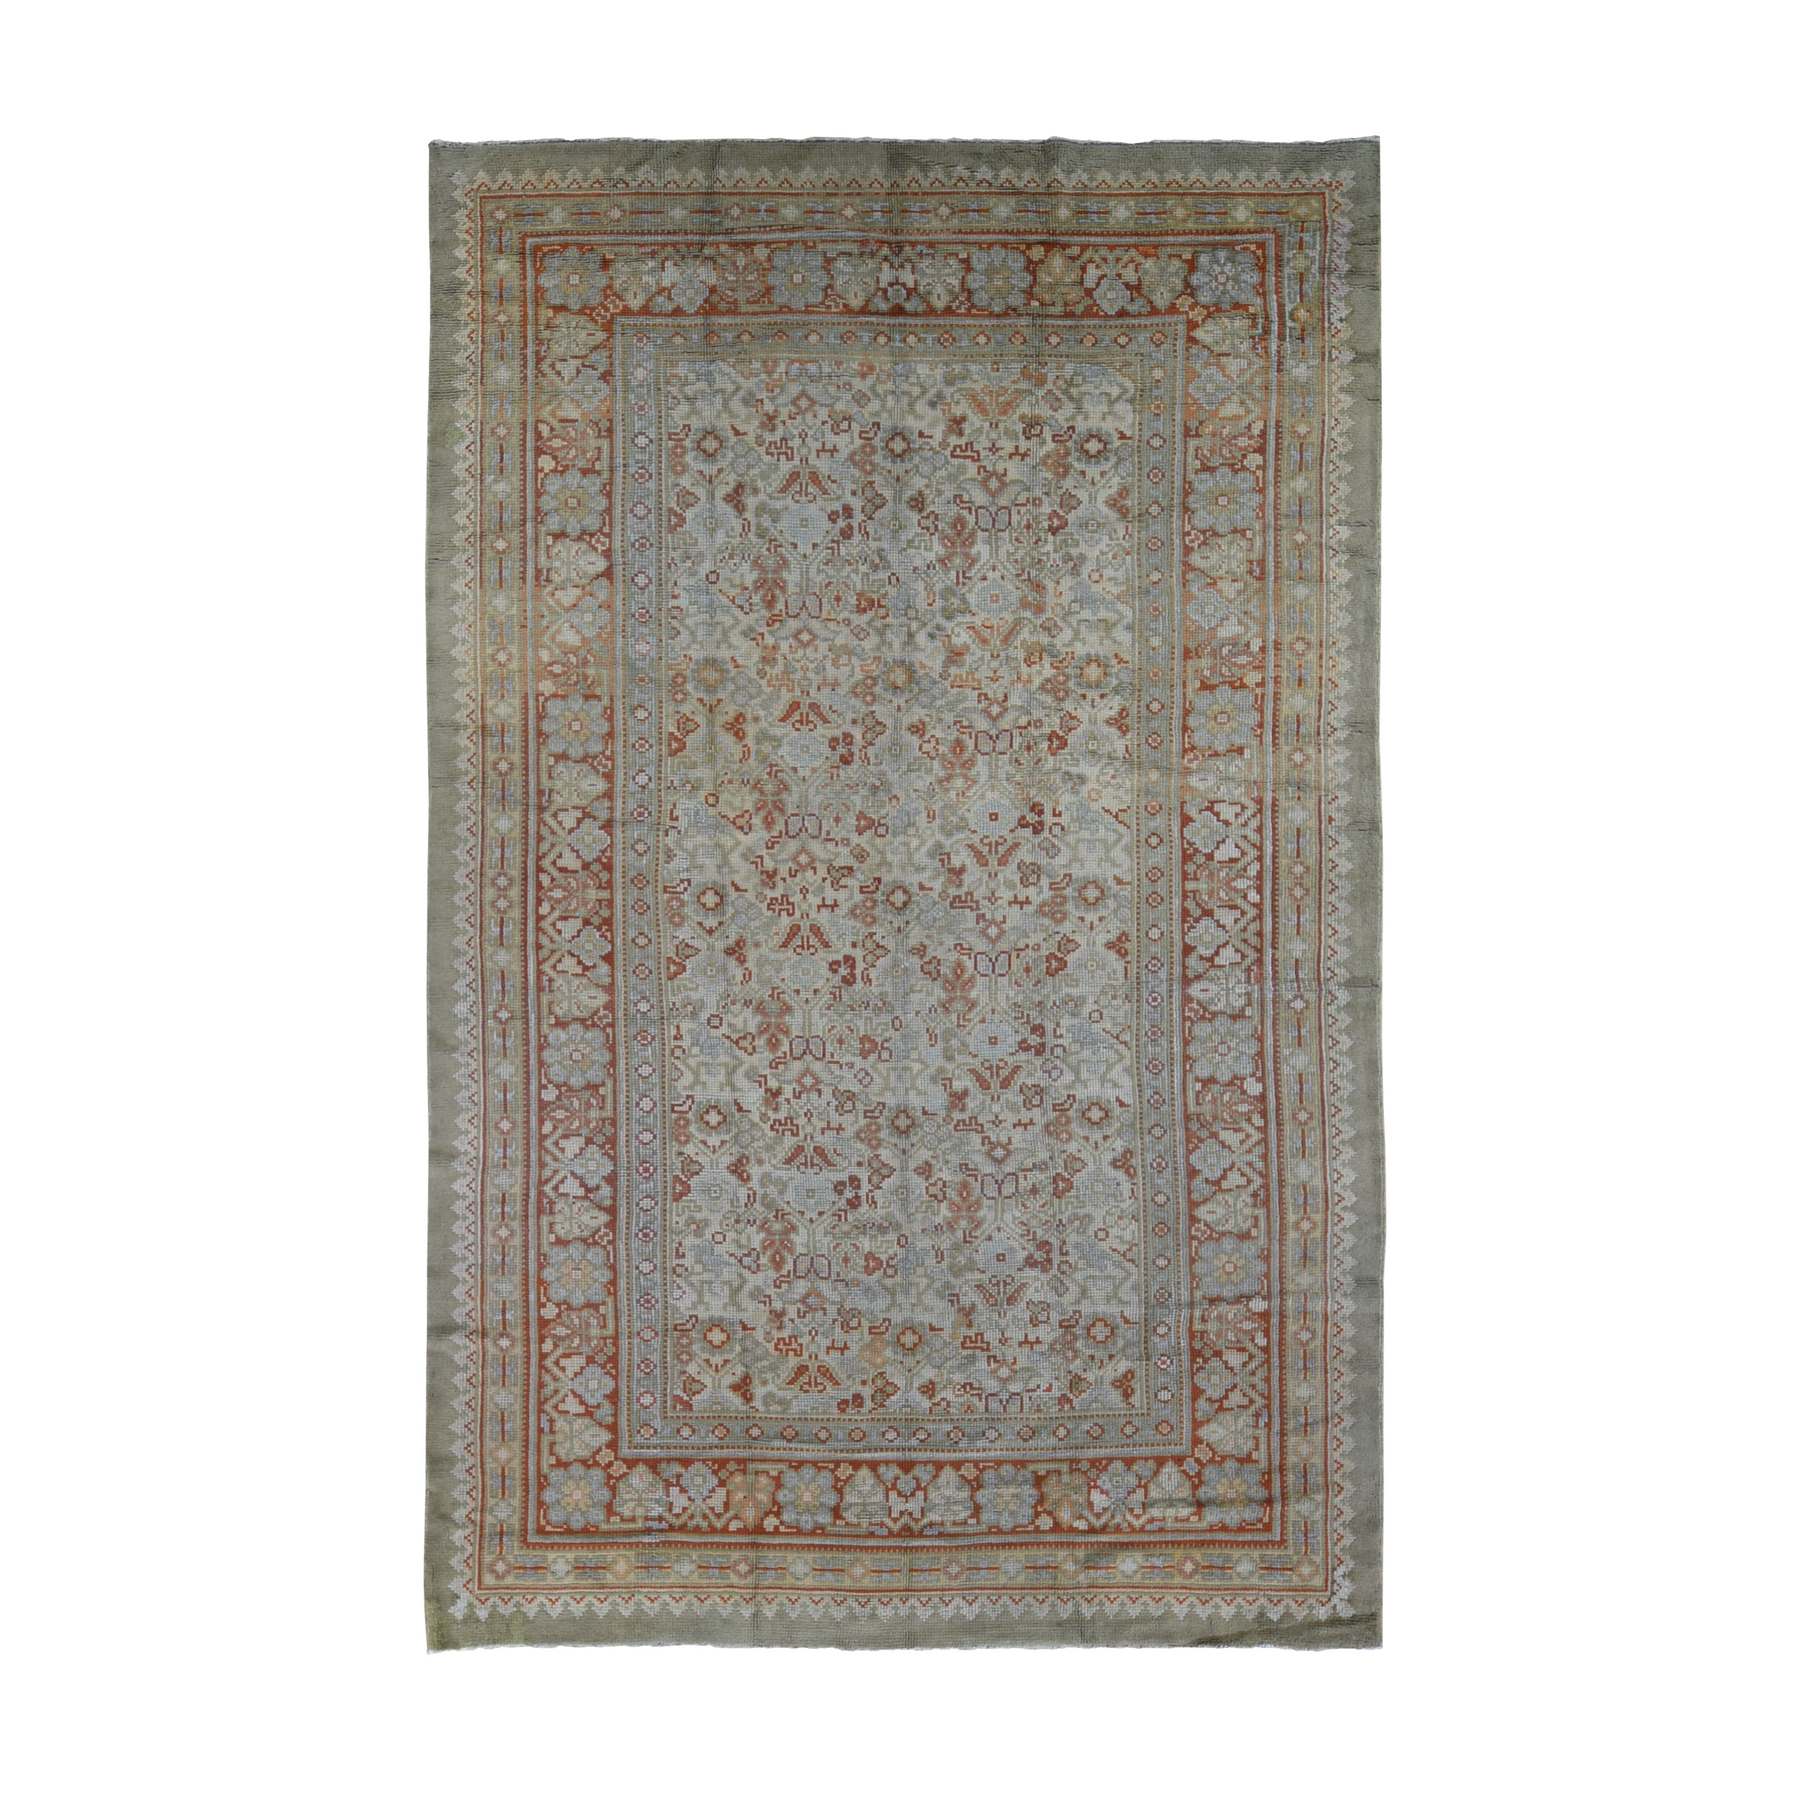 Antique-Hand-Knotted-Rug-400495